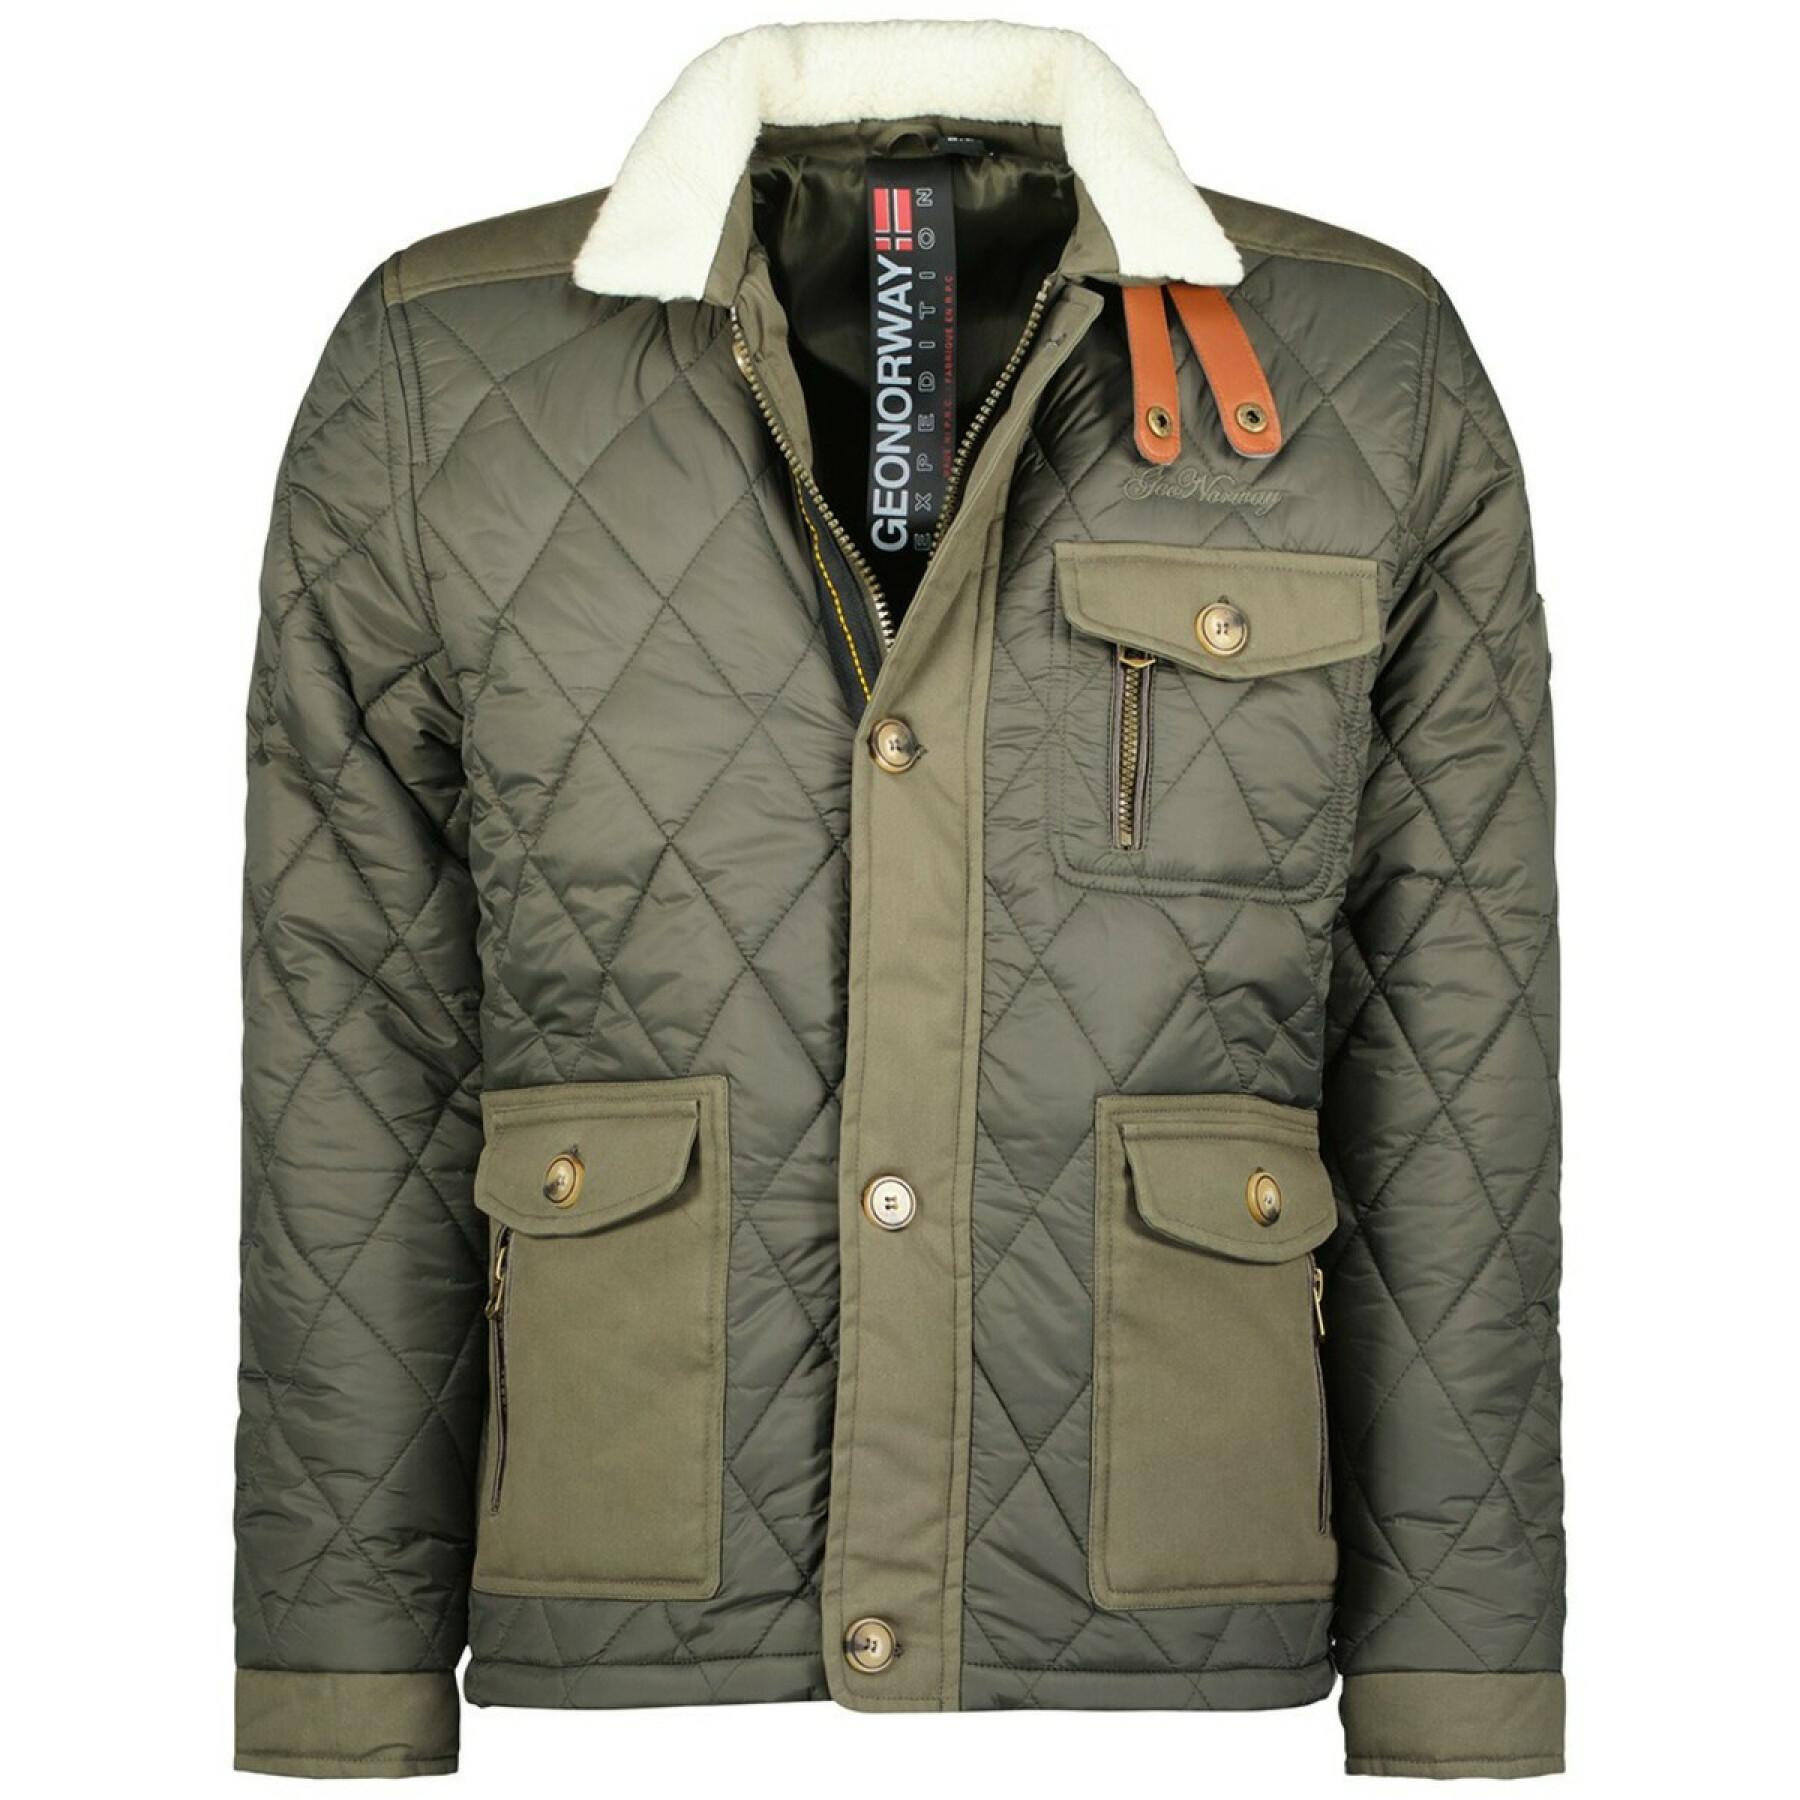 Jacket Geographical Norway Dalkov Db Eo